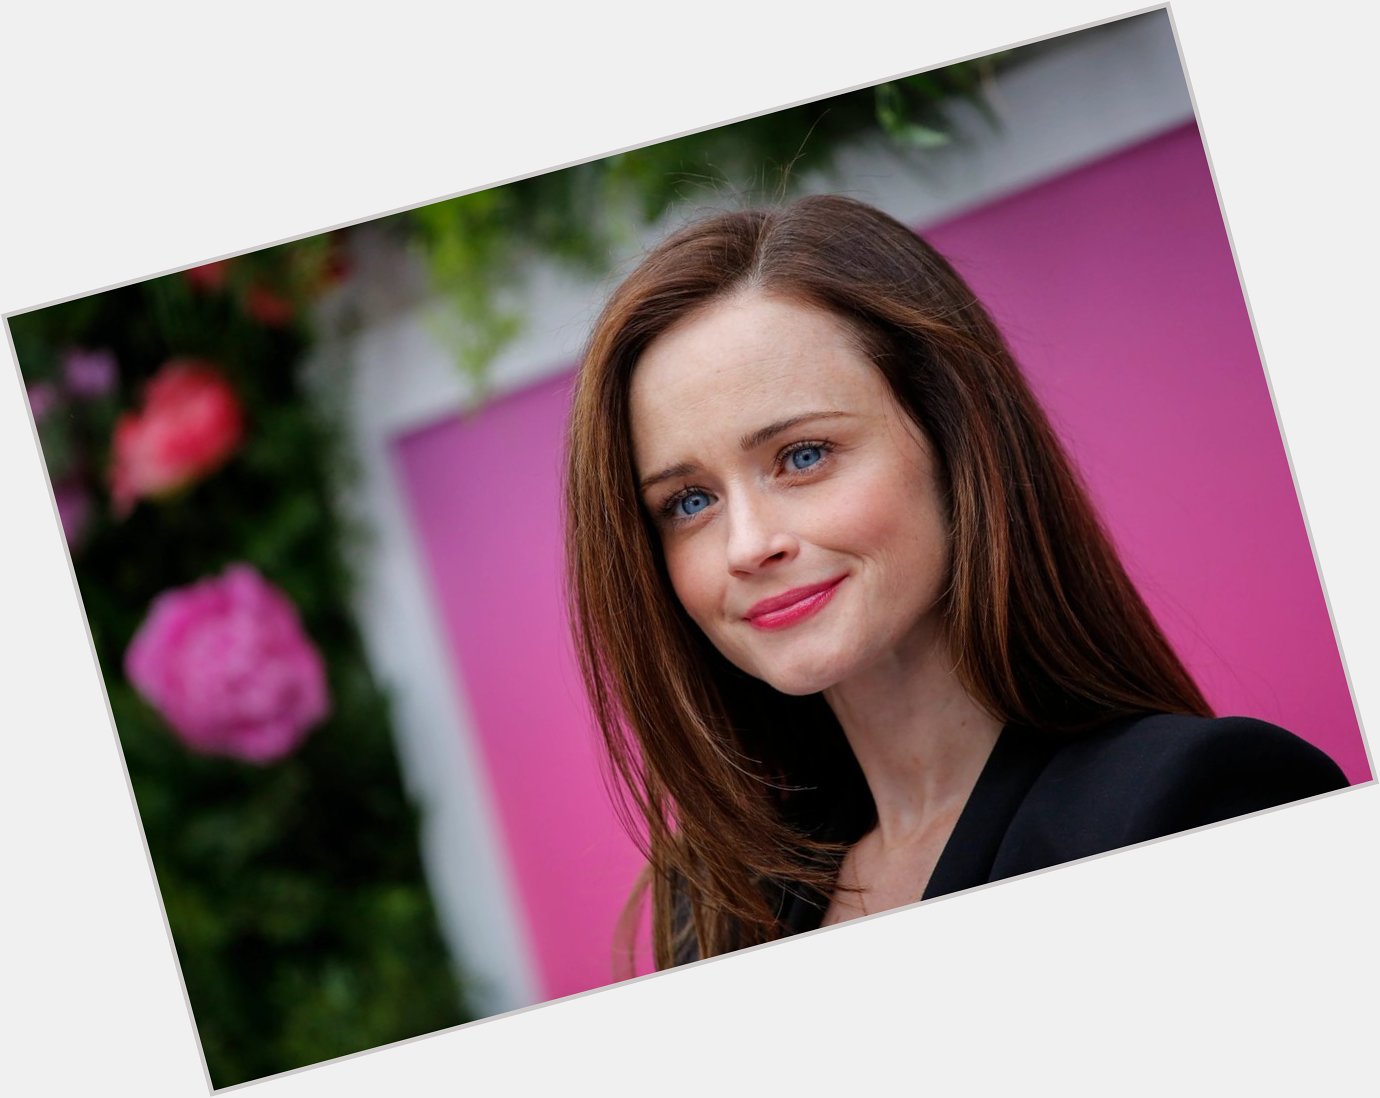 September 16, 2020
Happy birthday to American actress Alexis Bledel 39 years old. 